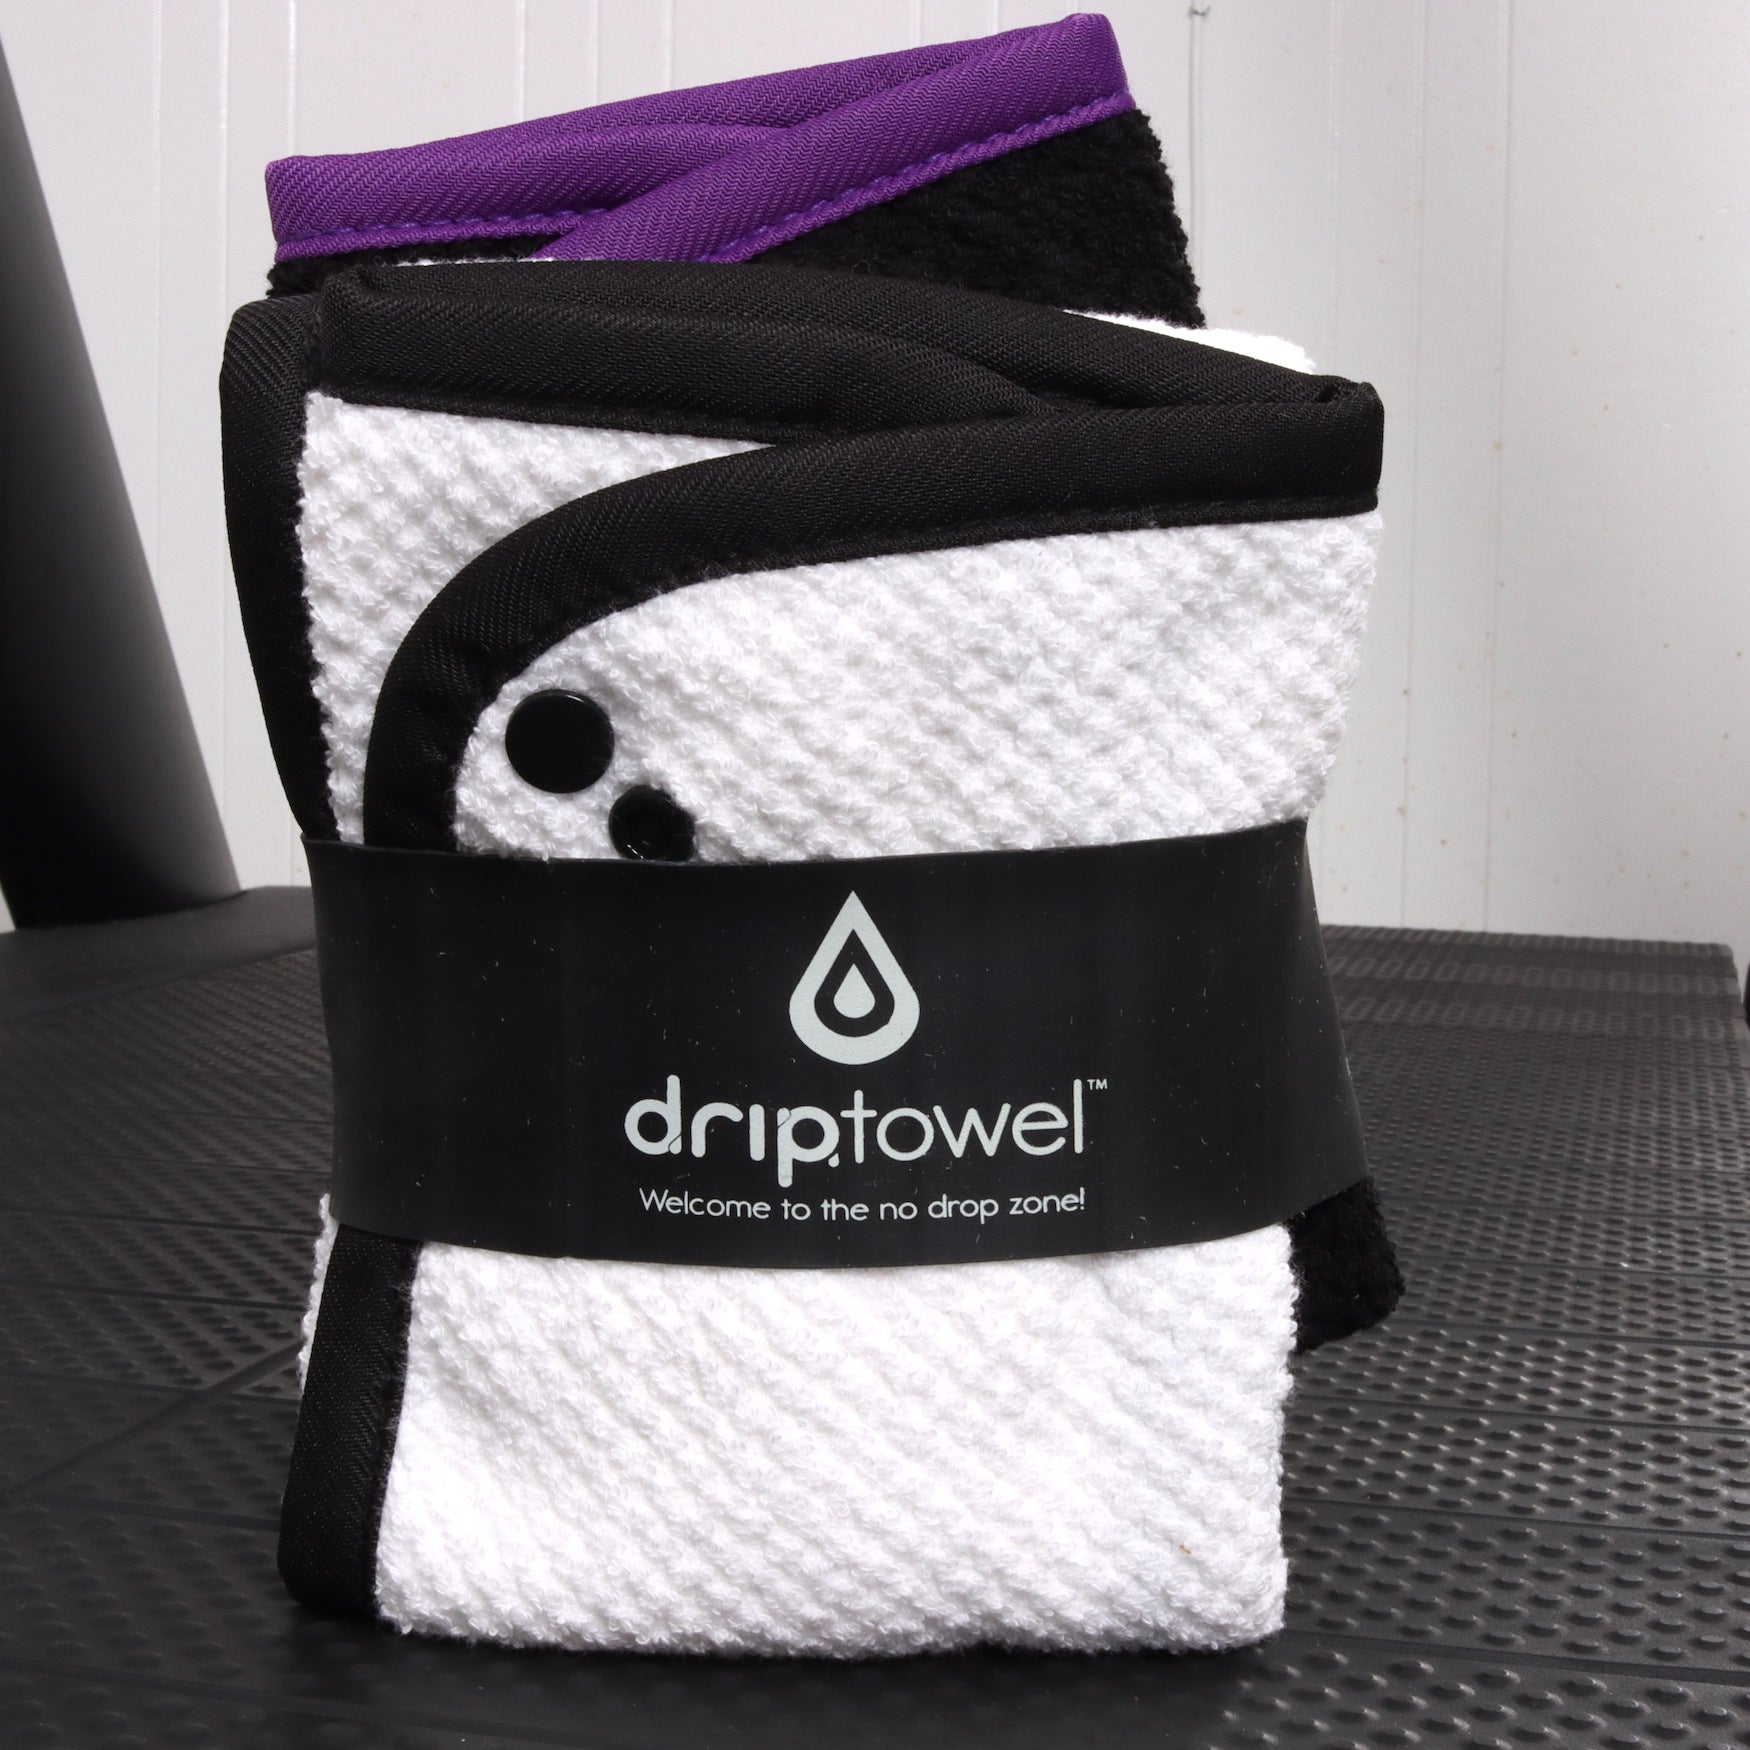 DRIPTOWEL - Retractable Sweat Towel for Treadmills and Spin Bikes